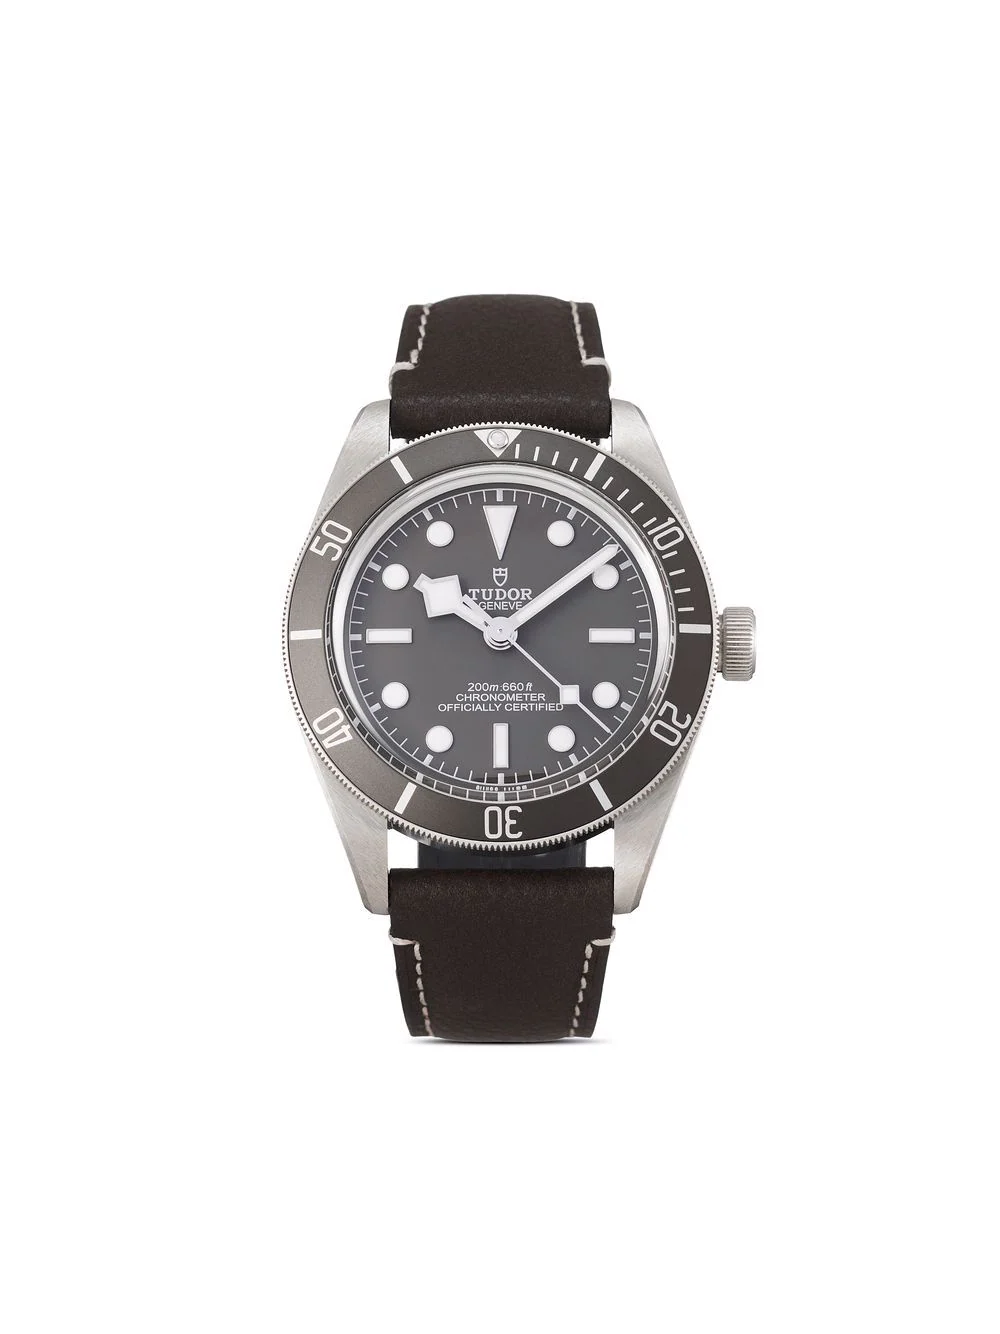 Tag Heuer Aquaracer Collection Watches